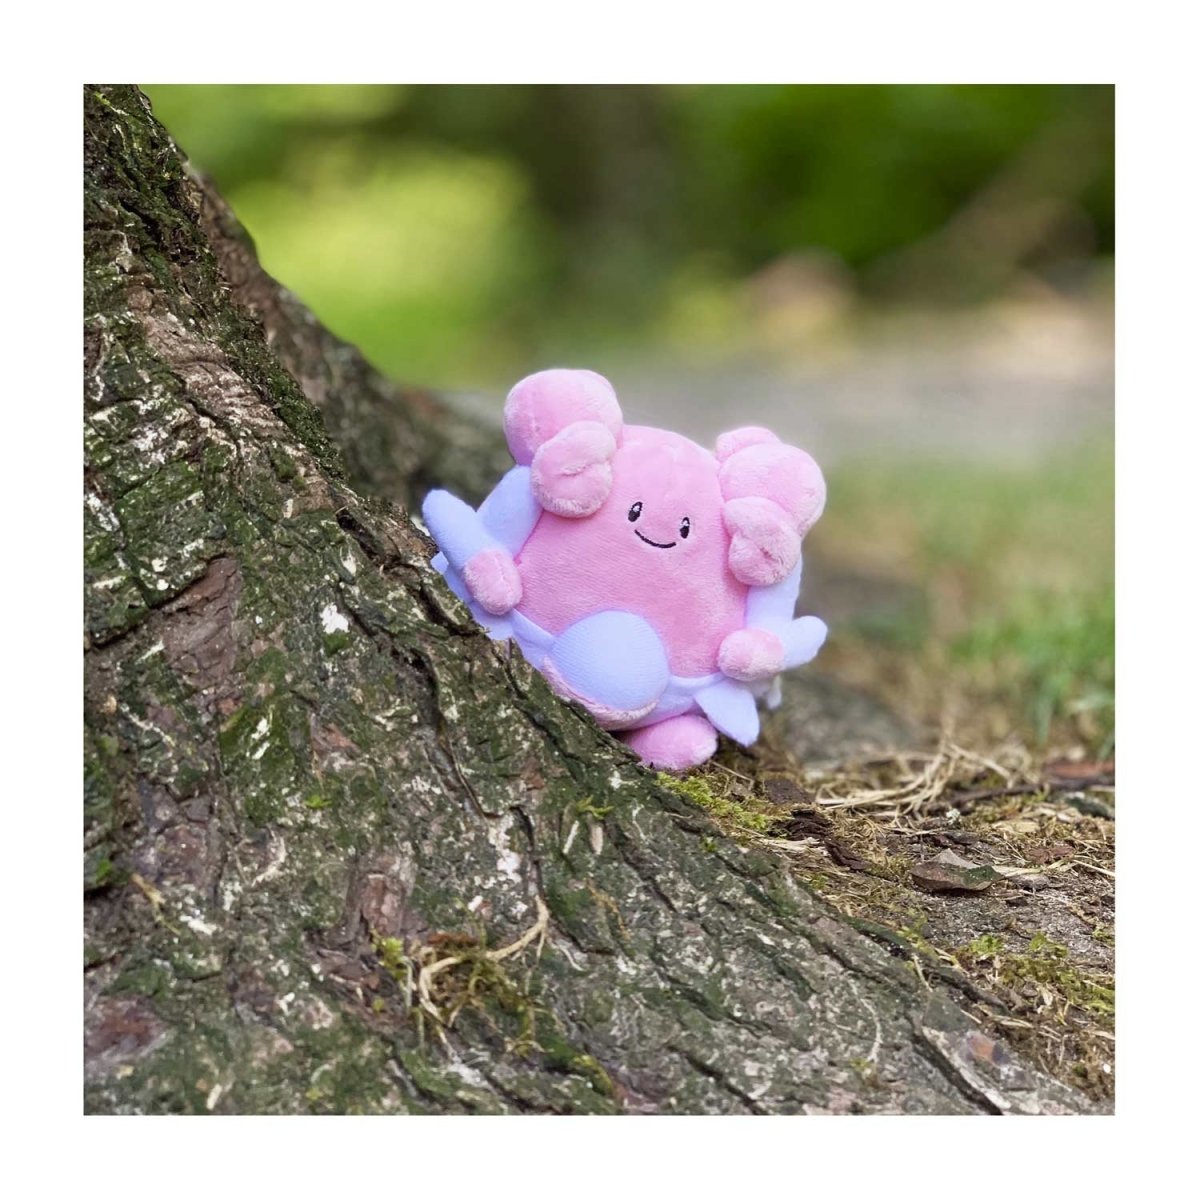 Blissey Sitting Cuties Plush - 5 In.  Pokémon Center Canada Official Site